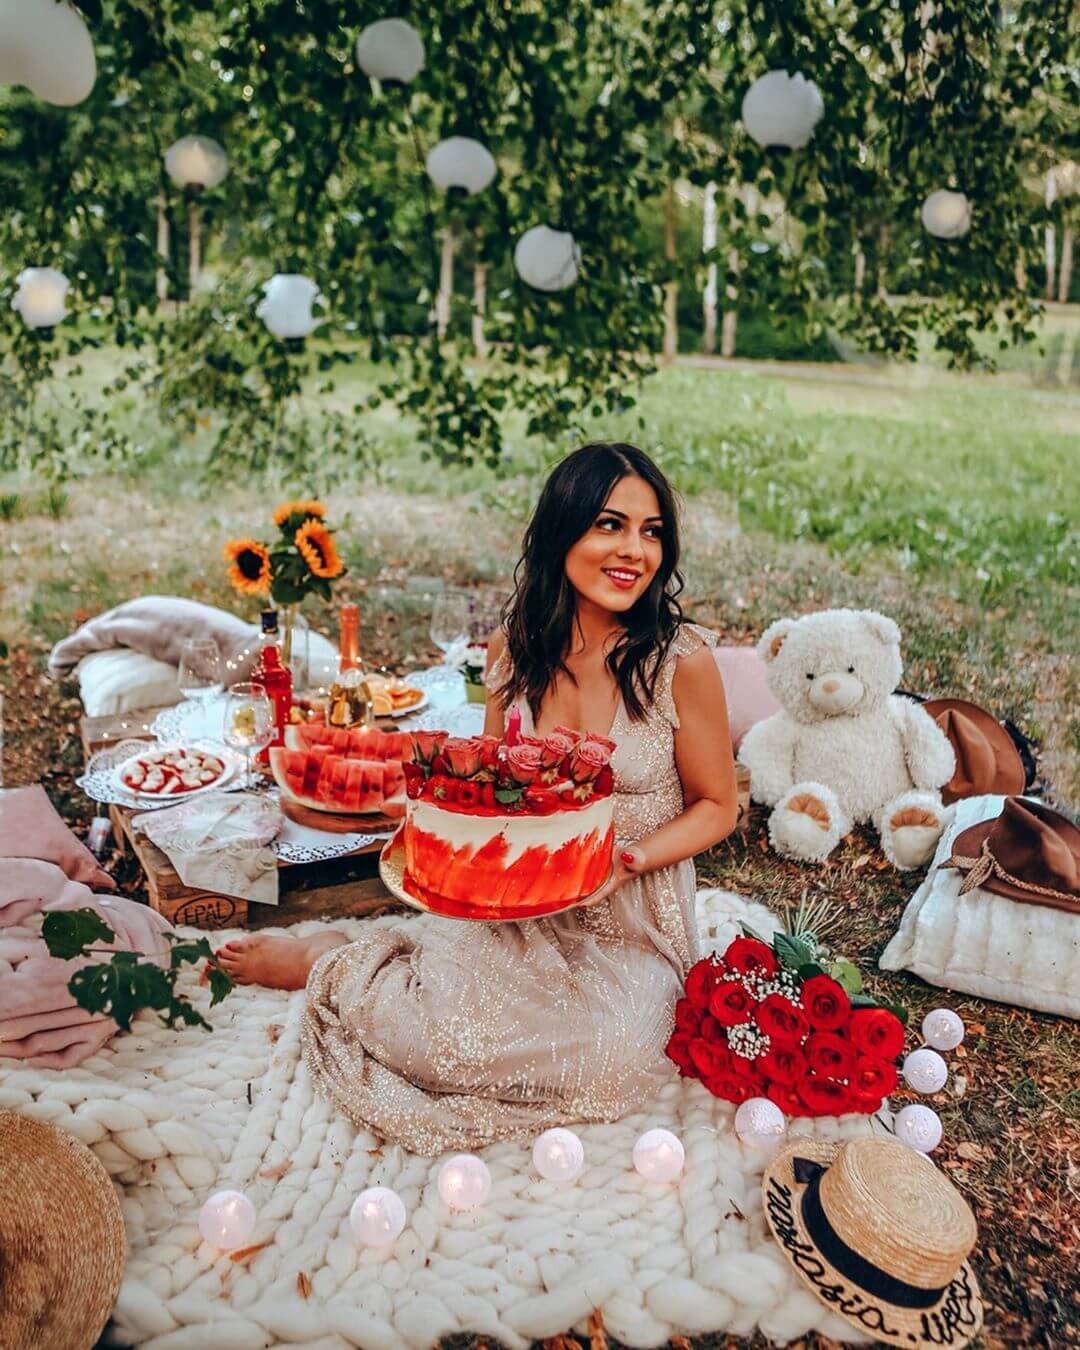 a woman sitting on grass holding her cake